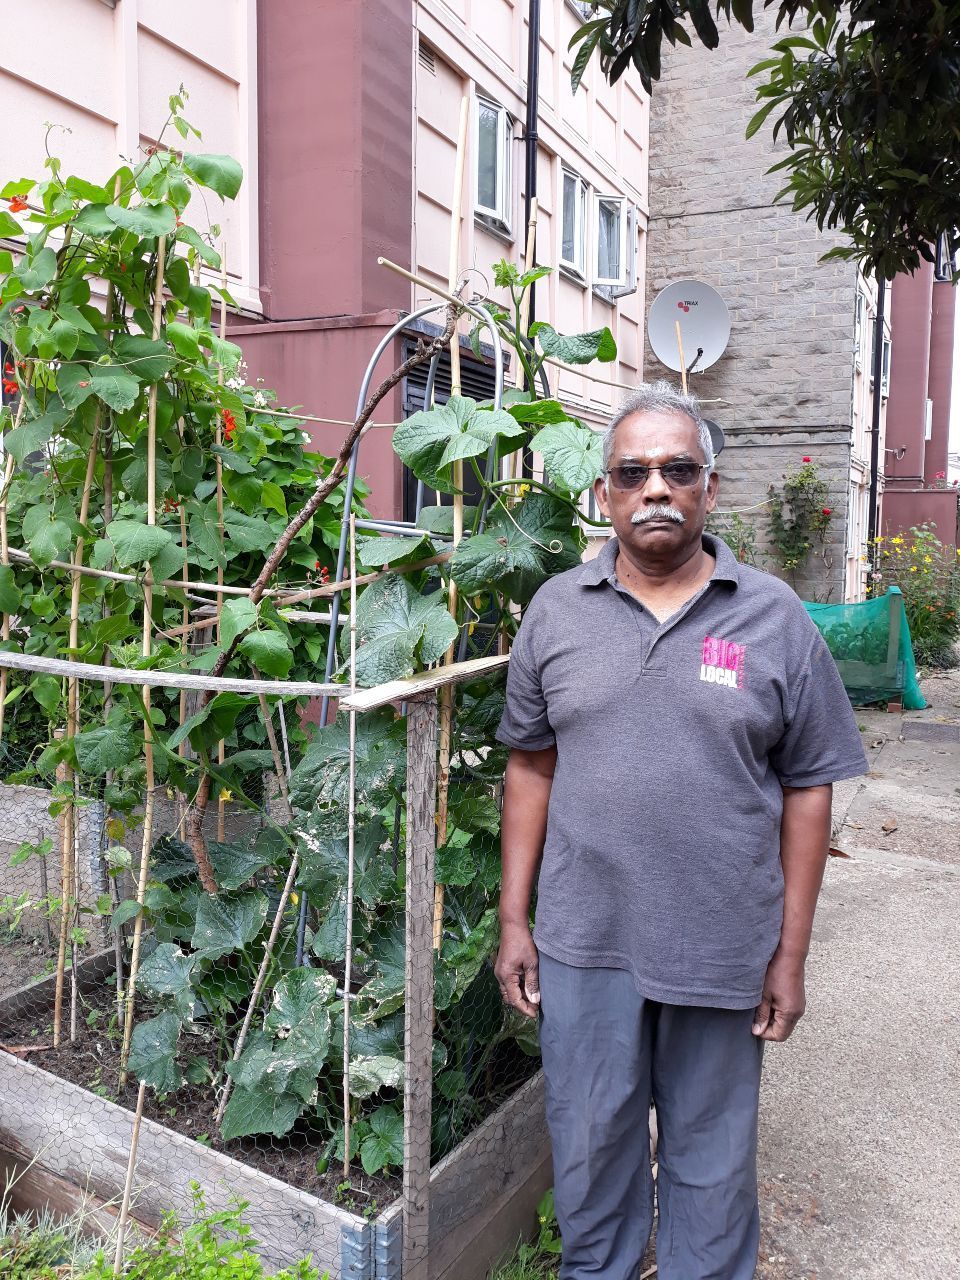 Mutthu standing outside a planter which is full of healthy growing veg. You can see an urban building in the background.